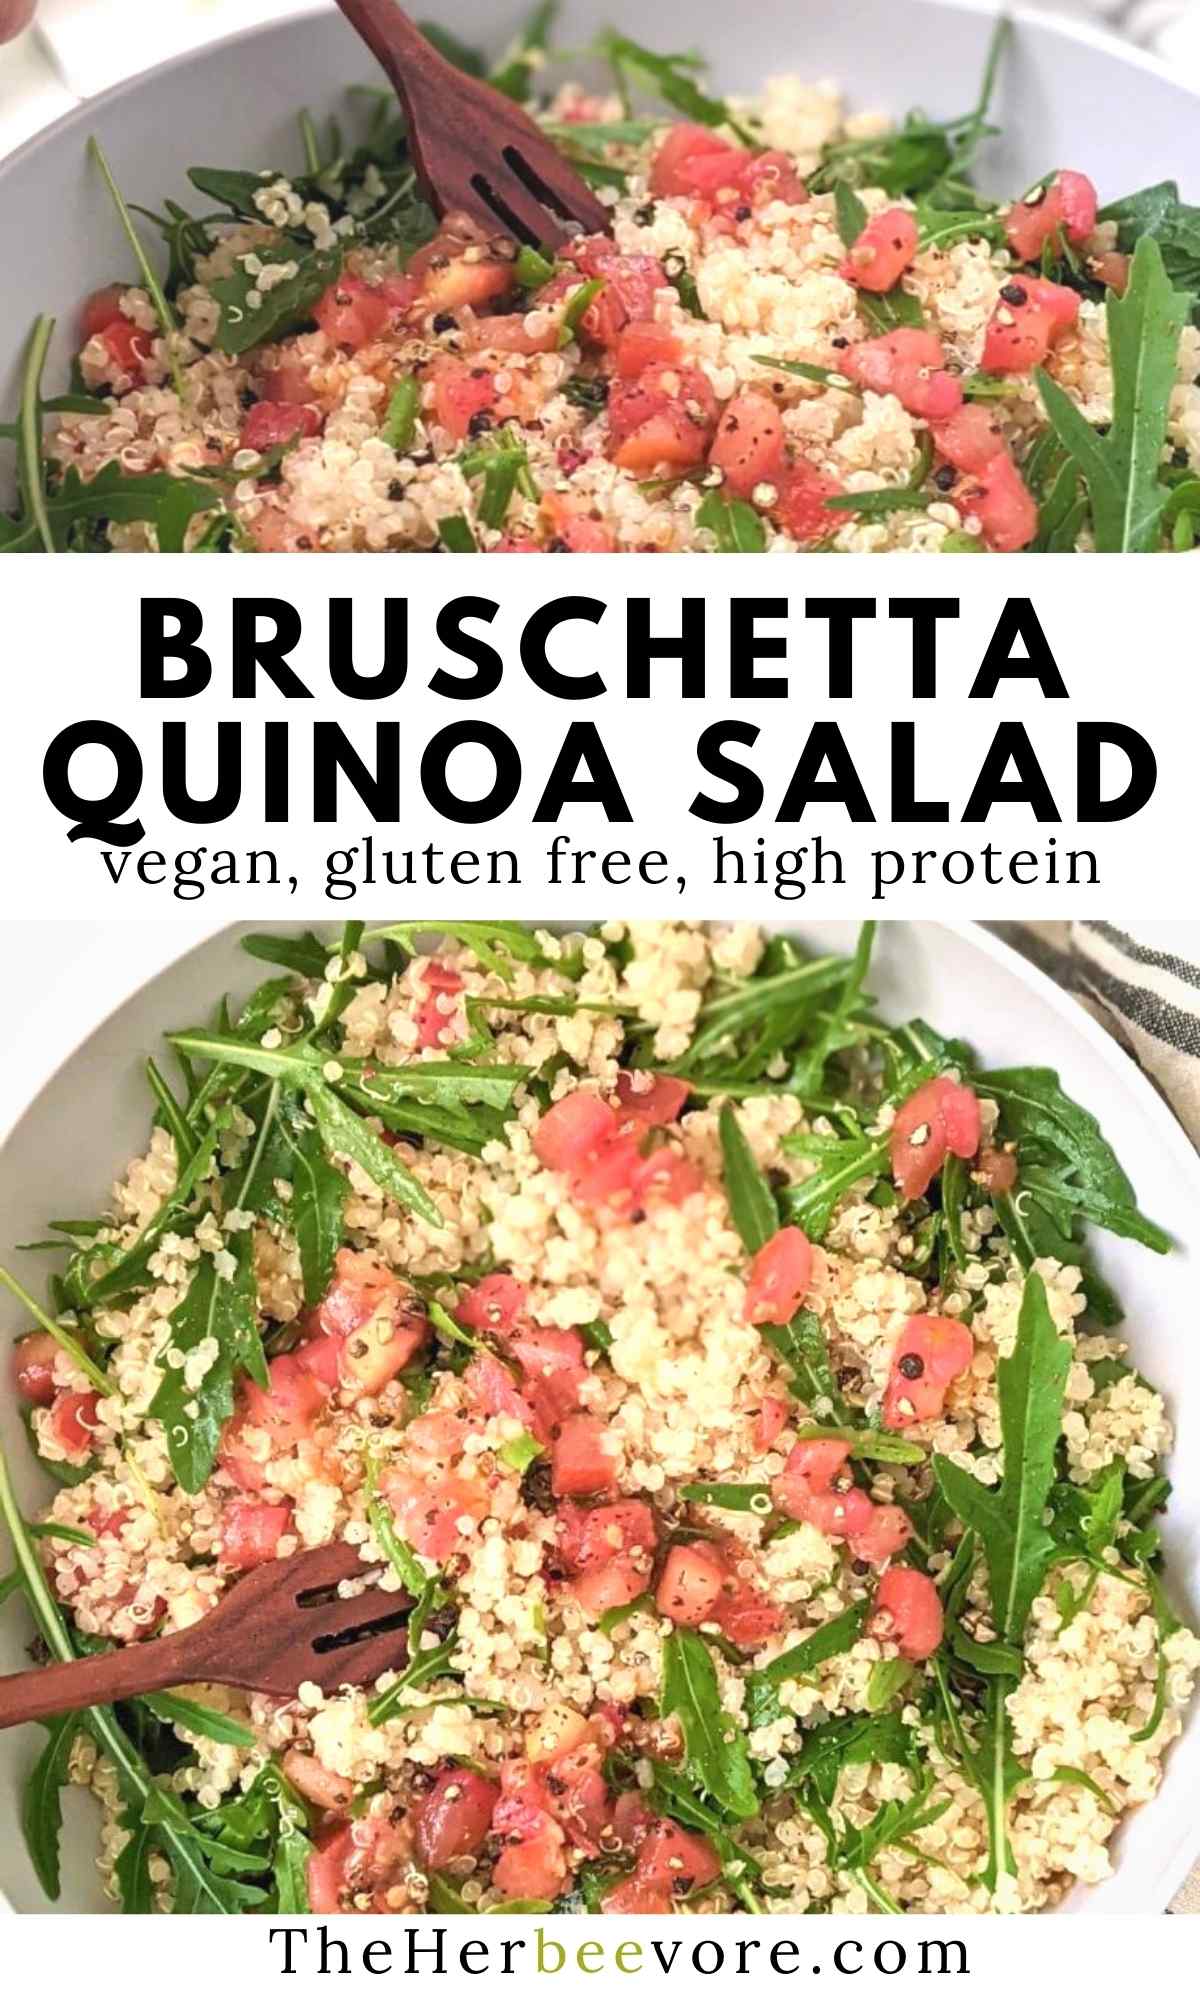 easy summer quinoa salad bowl recipe with bruschetta quinoa salad vegan gluten free summer salads dairy free high protein lunch or dinner recipes with arugula quinoa salad with tomatoes and basil and olive oil